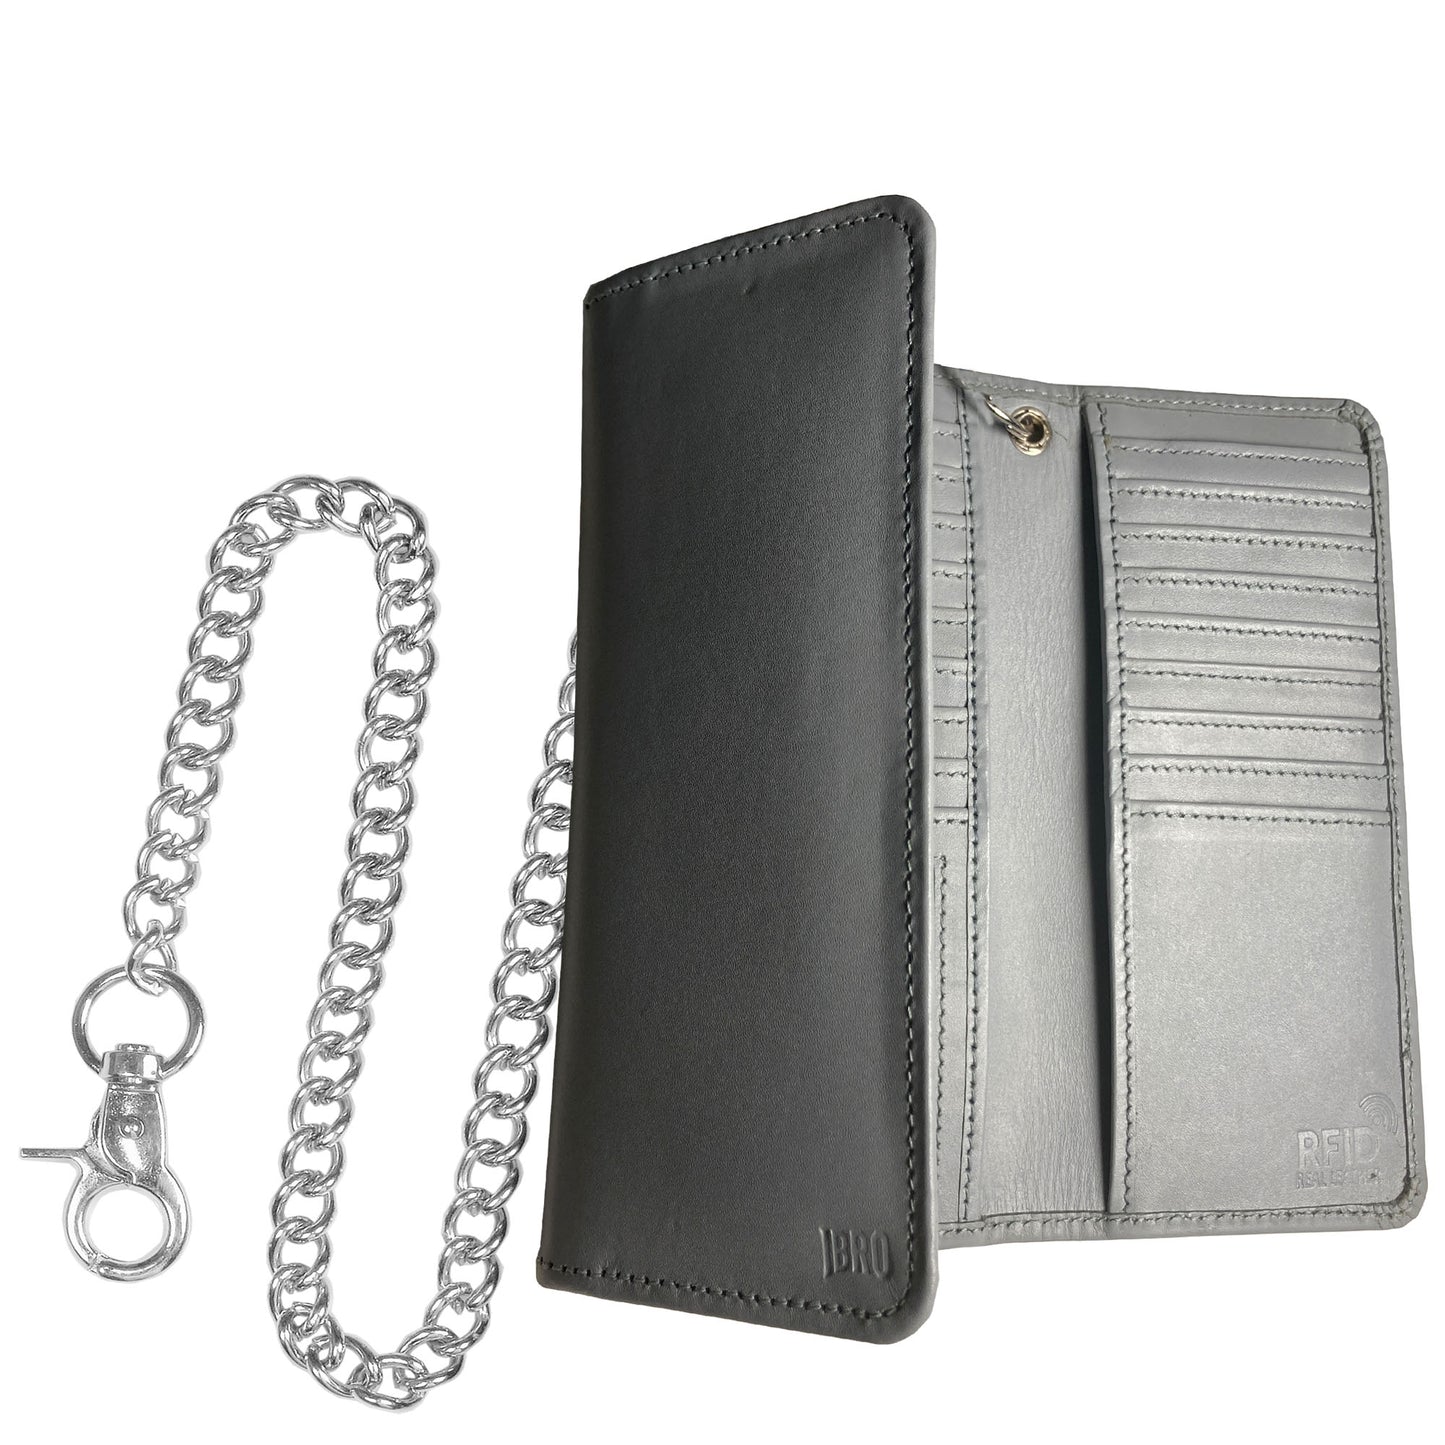 IBRO Motorcycle Chain Wallet for Men – 100% Natural Genuine Leather, Long Trifold RFID Blocking Wallet Aniline Grey